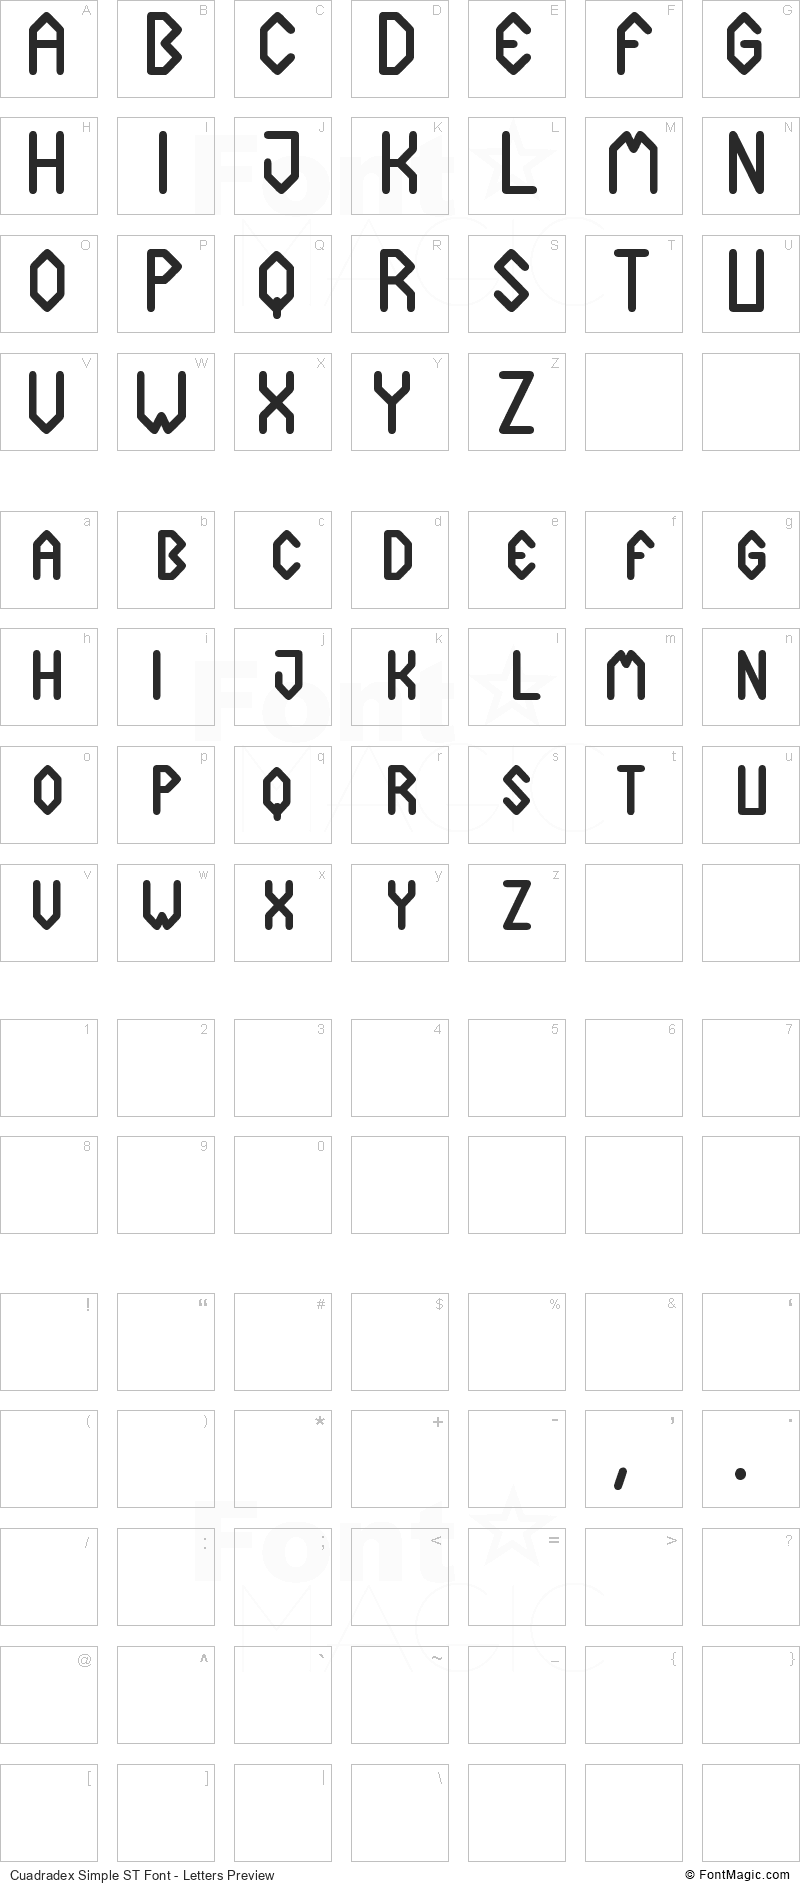 Cuadradex Simple ST Font - All Latters Preview Chart